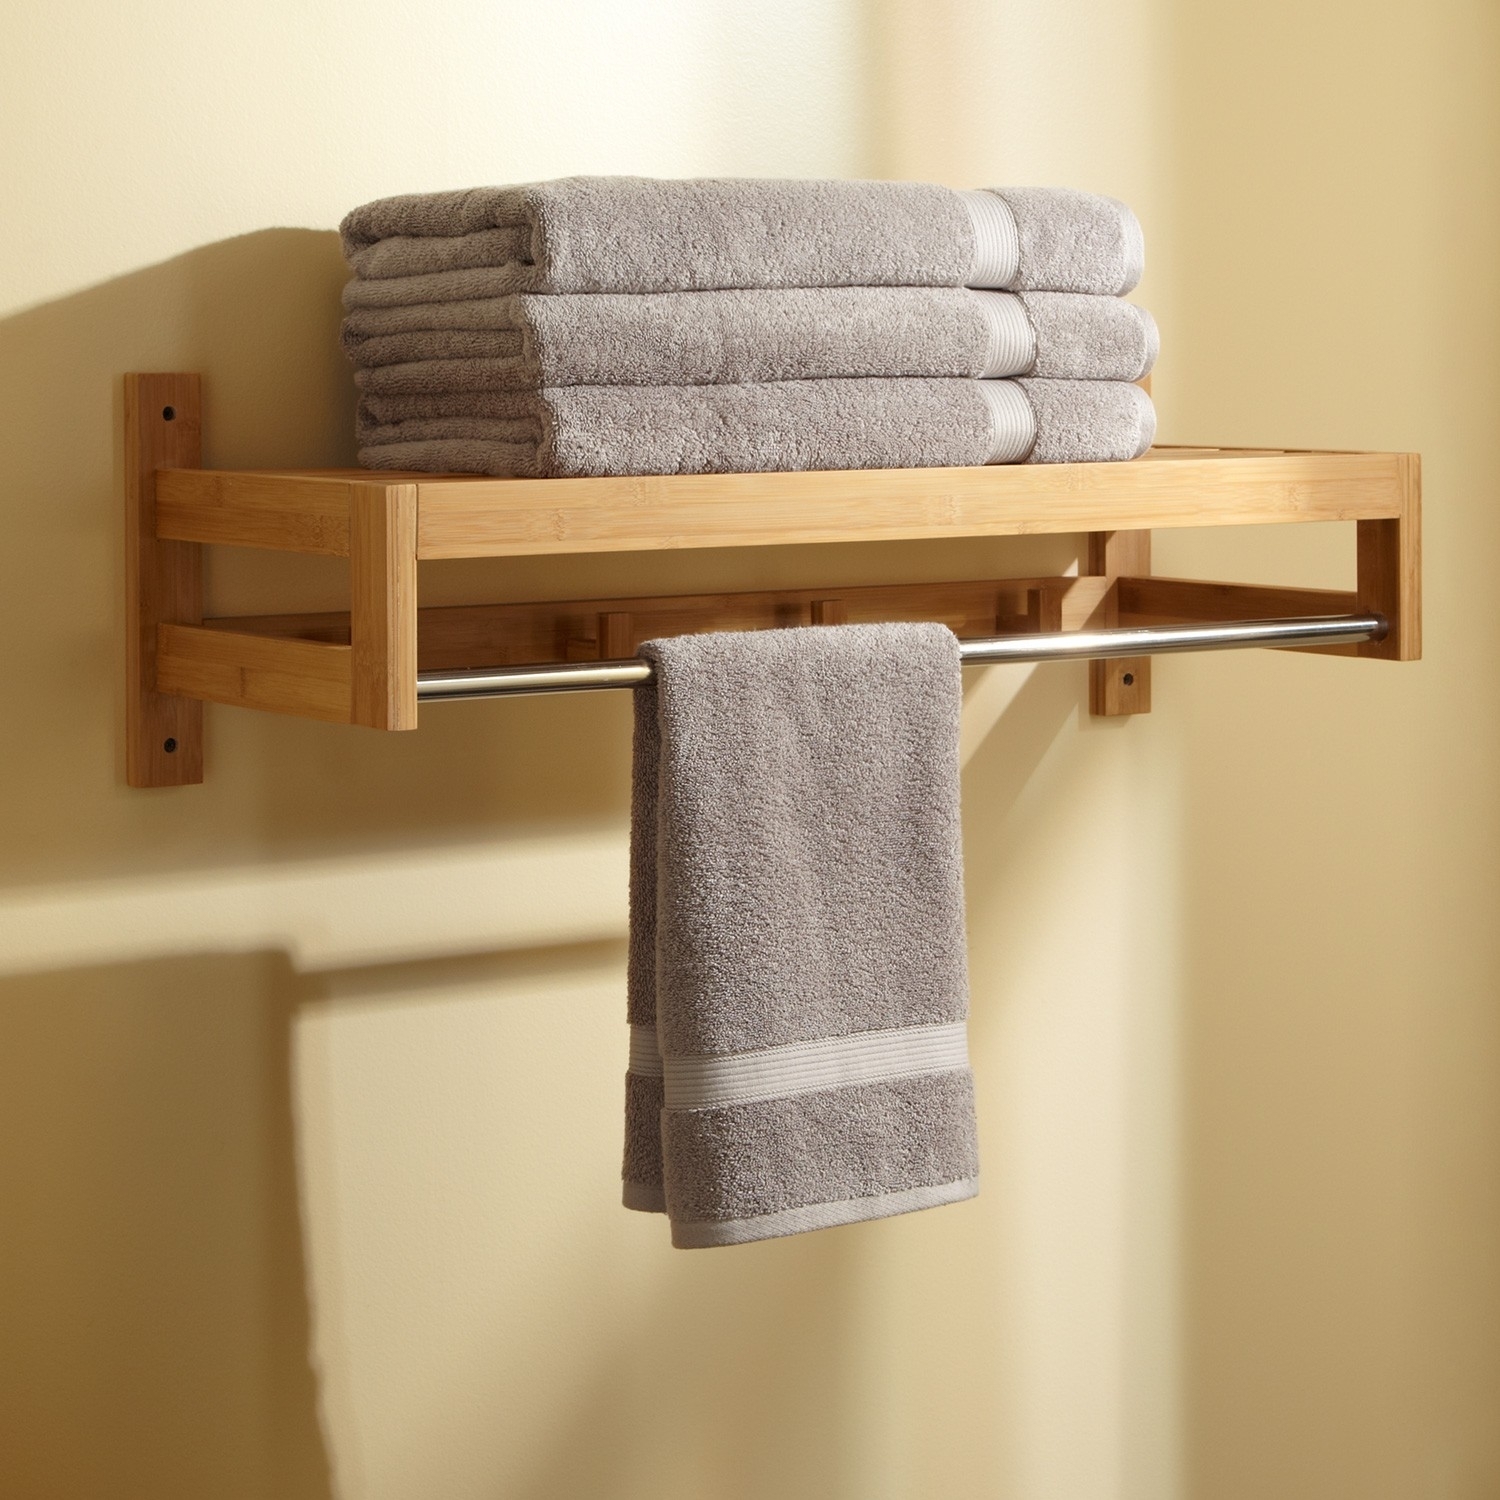 Towel Rack With Shelf You Ll Love In 2021 Visualhunt